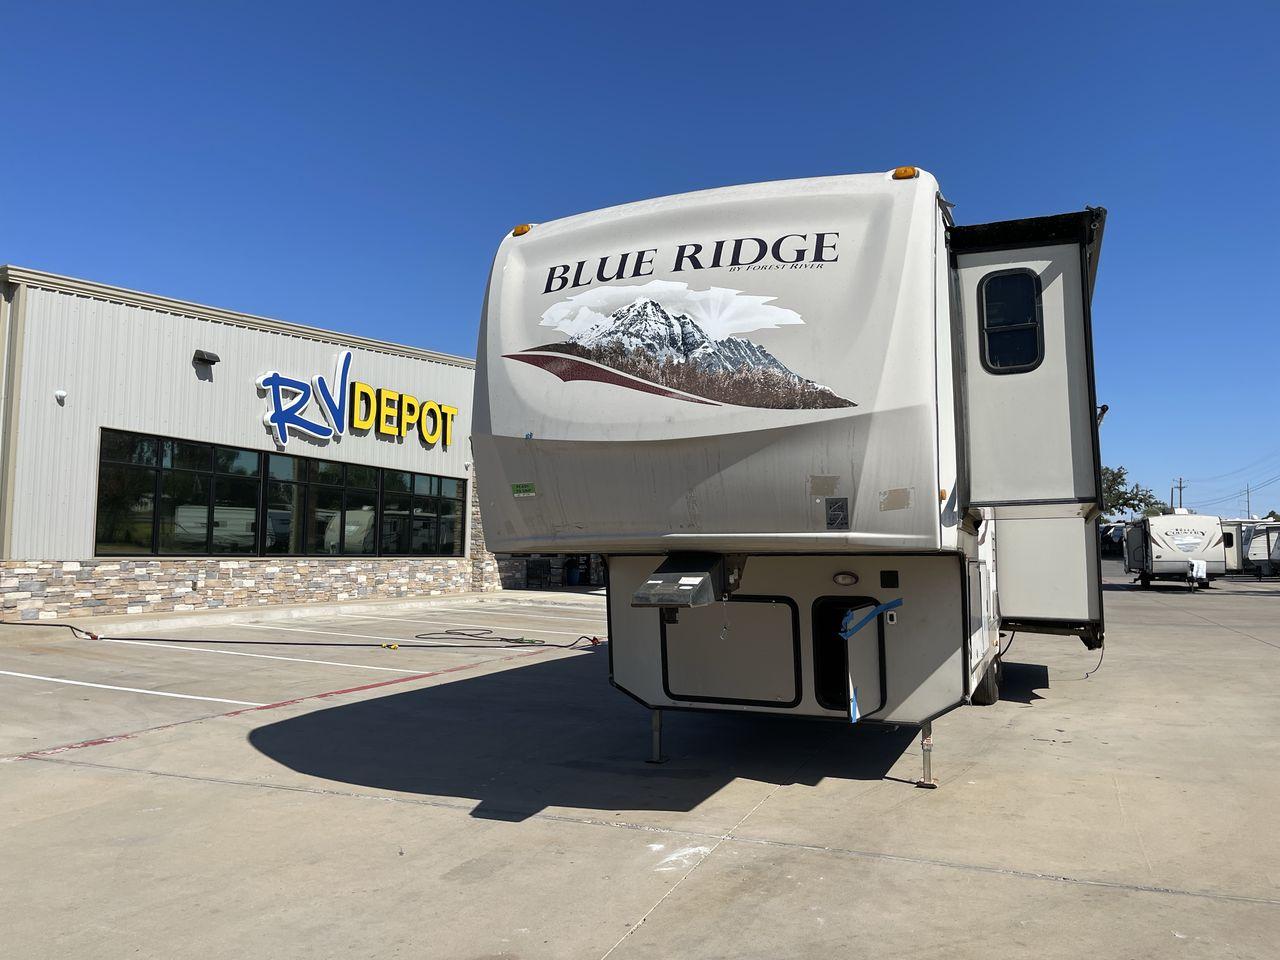 2011 TAN BLUE RIDGE 3125 (4X4FBLG22BG) , Length: 35.17 ft. | Dry Weight: 11,079 lbs. | Gross Weight: 13,975 lbs. | Slides: 3 transmission, located at 4319 N Main St, Cleburne, TX, 76033, (817) 678-5133, 32.385960, -97.391212 - Discover the perfect blend of comfort and functionality with the 2011 Blue Ridge 3125. It is a meticulously designed fifth-wheel trailer crafted for unforgettable travel experiences. Extending to 35 feet, this model incorporates three slide-outs, ingeniously expanding the living space to create an i - Photo #0